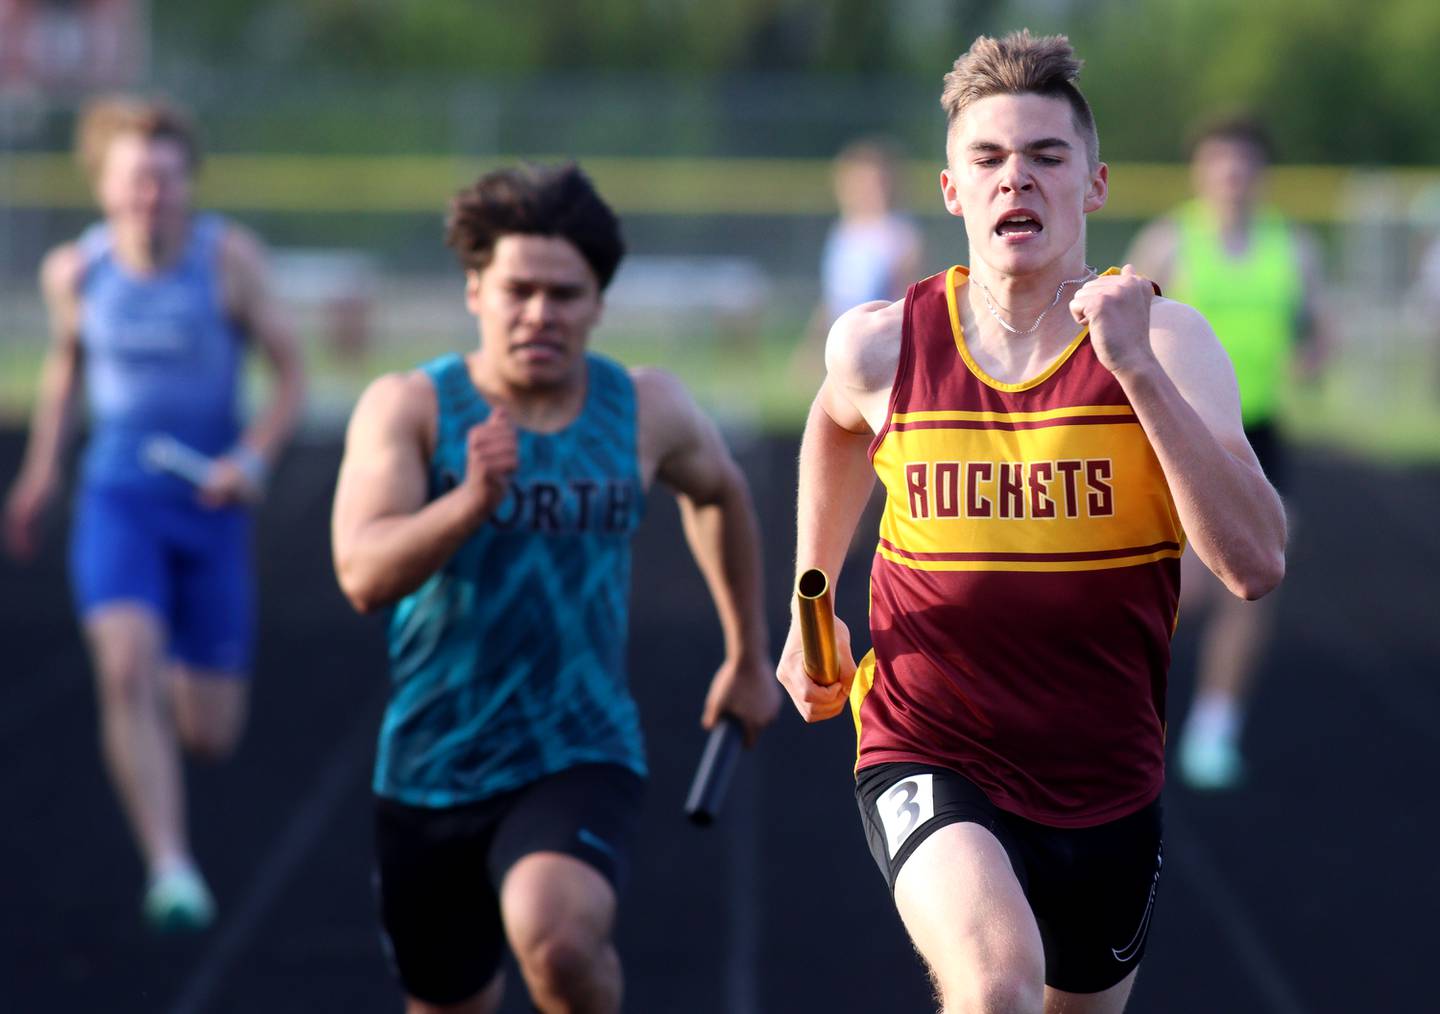 Richmond-Burton’s Jack Martens anchors the Rockets’ 800-meter relay during Kishwaukee River Conference track meet action at Marengo Tuesday night.